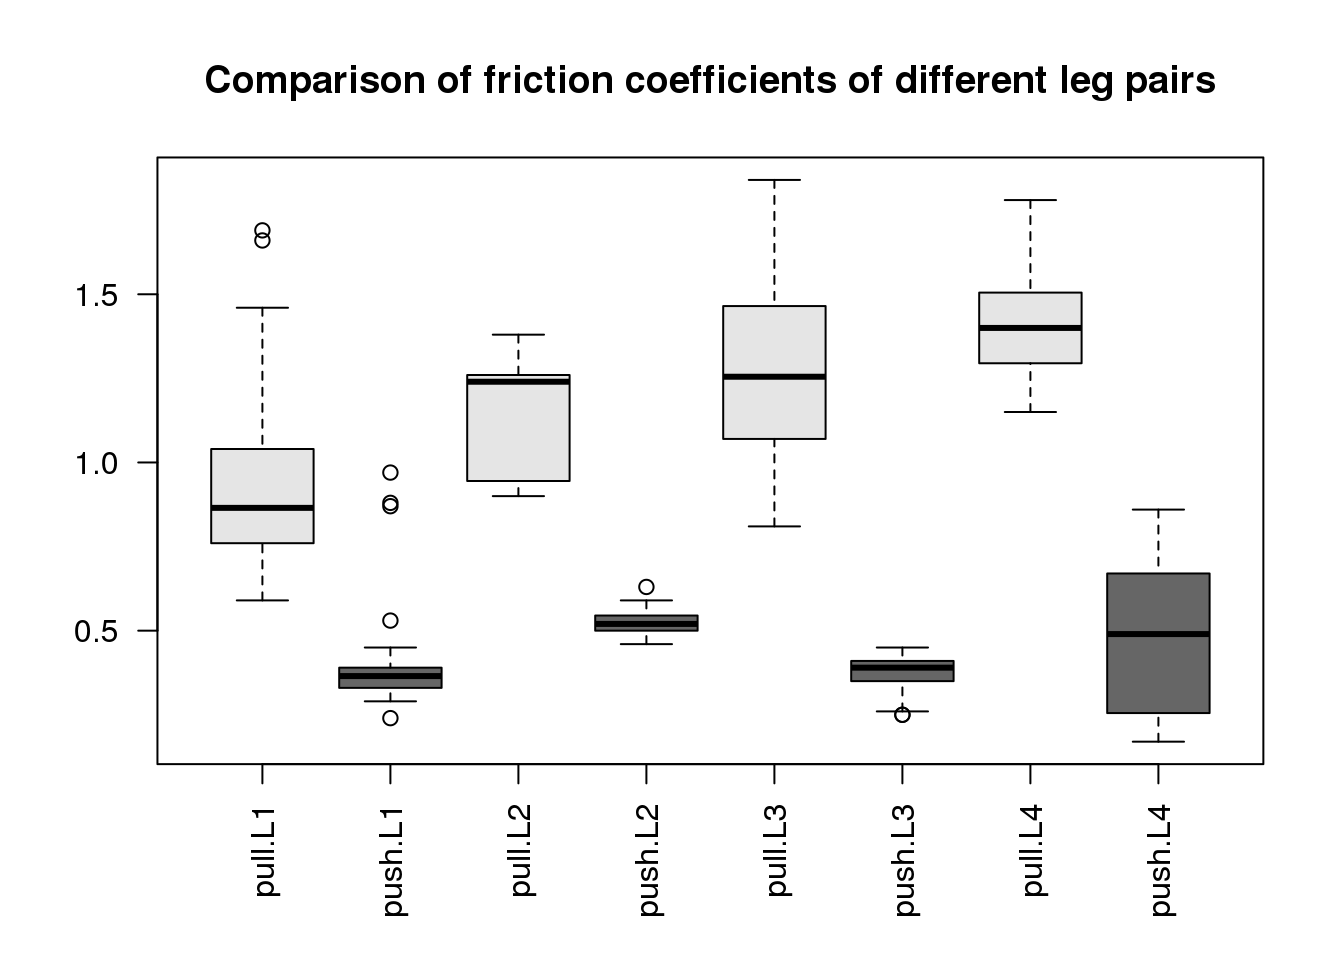 Comparison of friction coefficients of spiders' different leg pairs. The friction coefficient is calculated as the ratio of two forces (see paper Methods) so it is unitless.